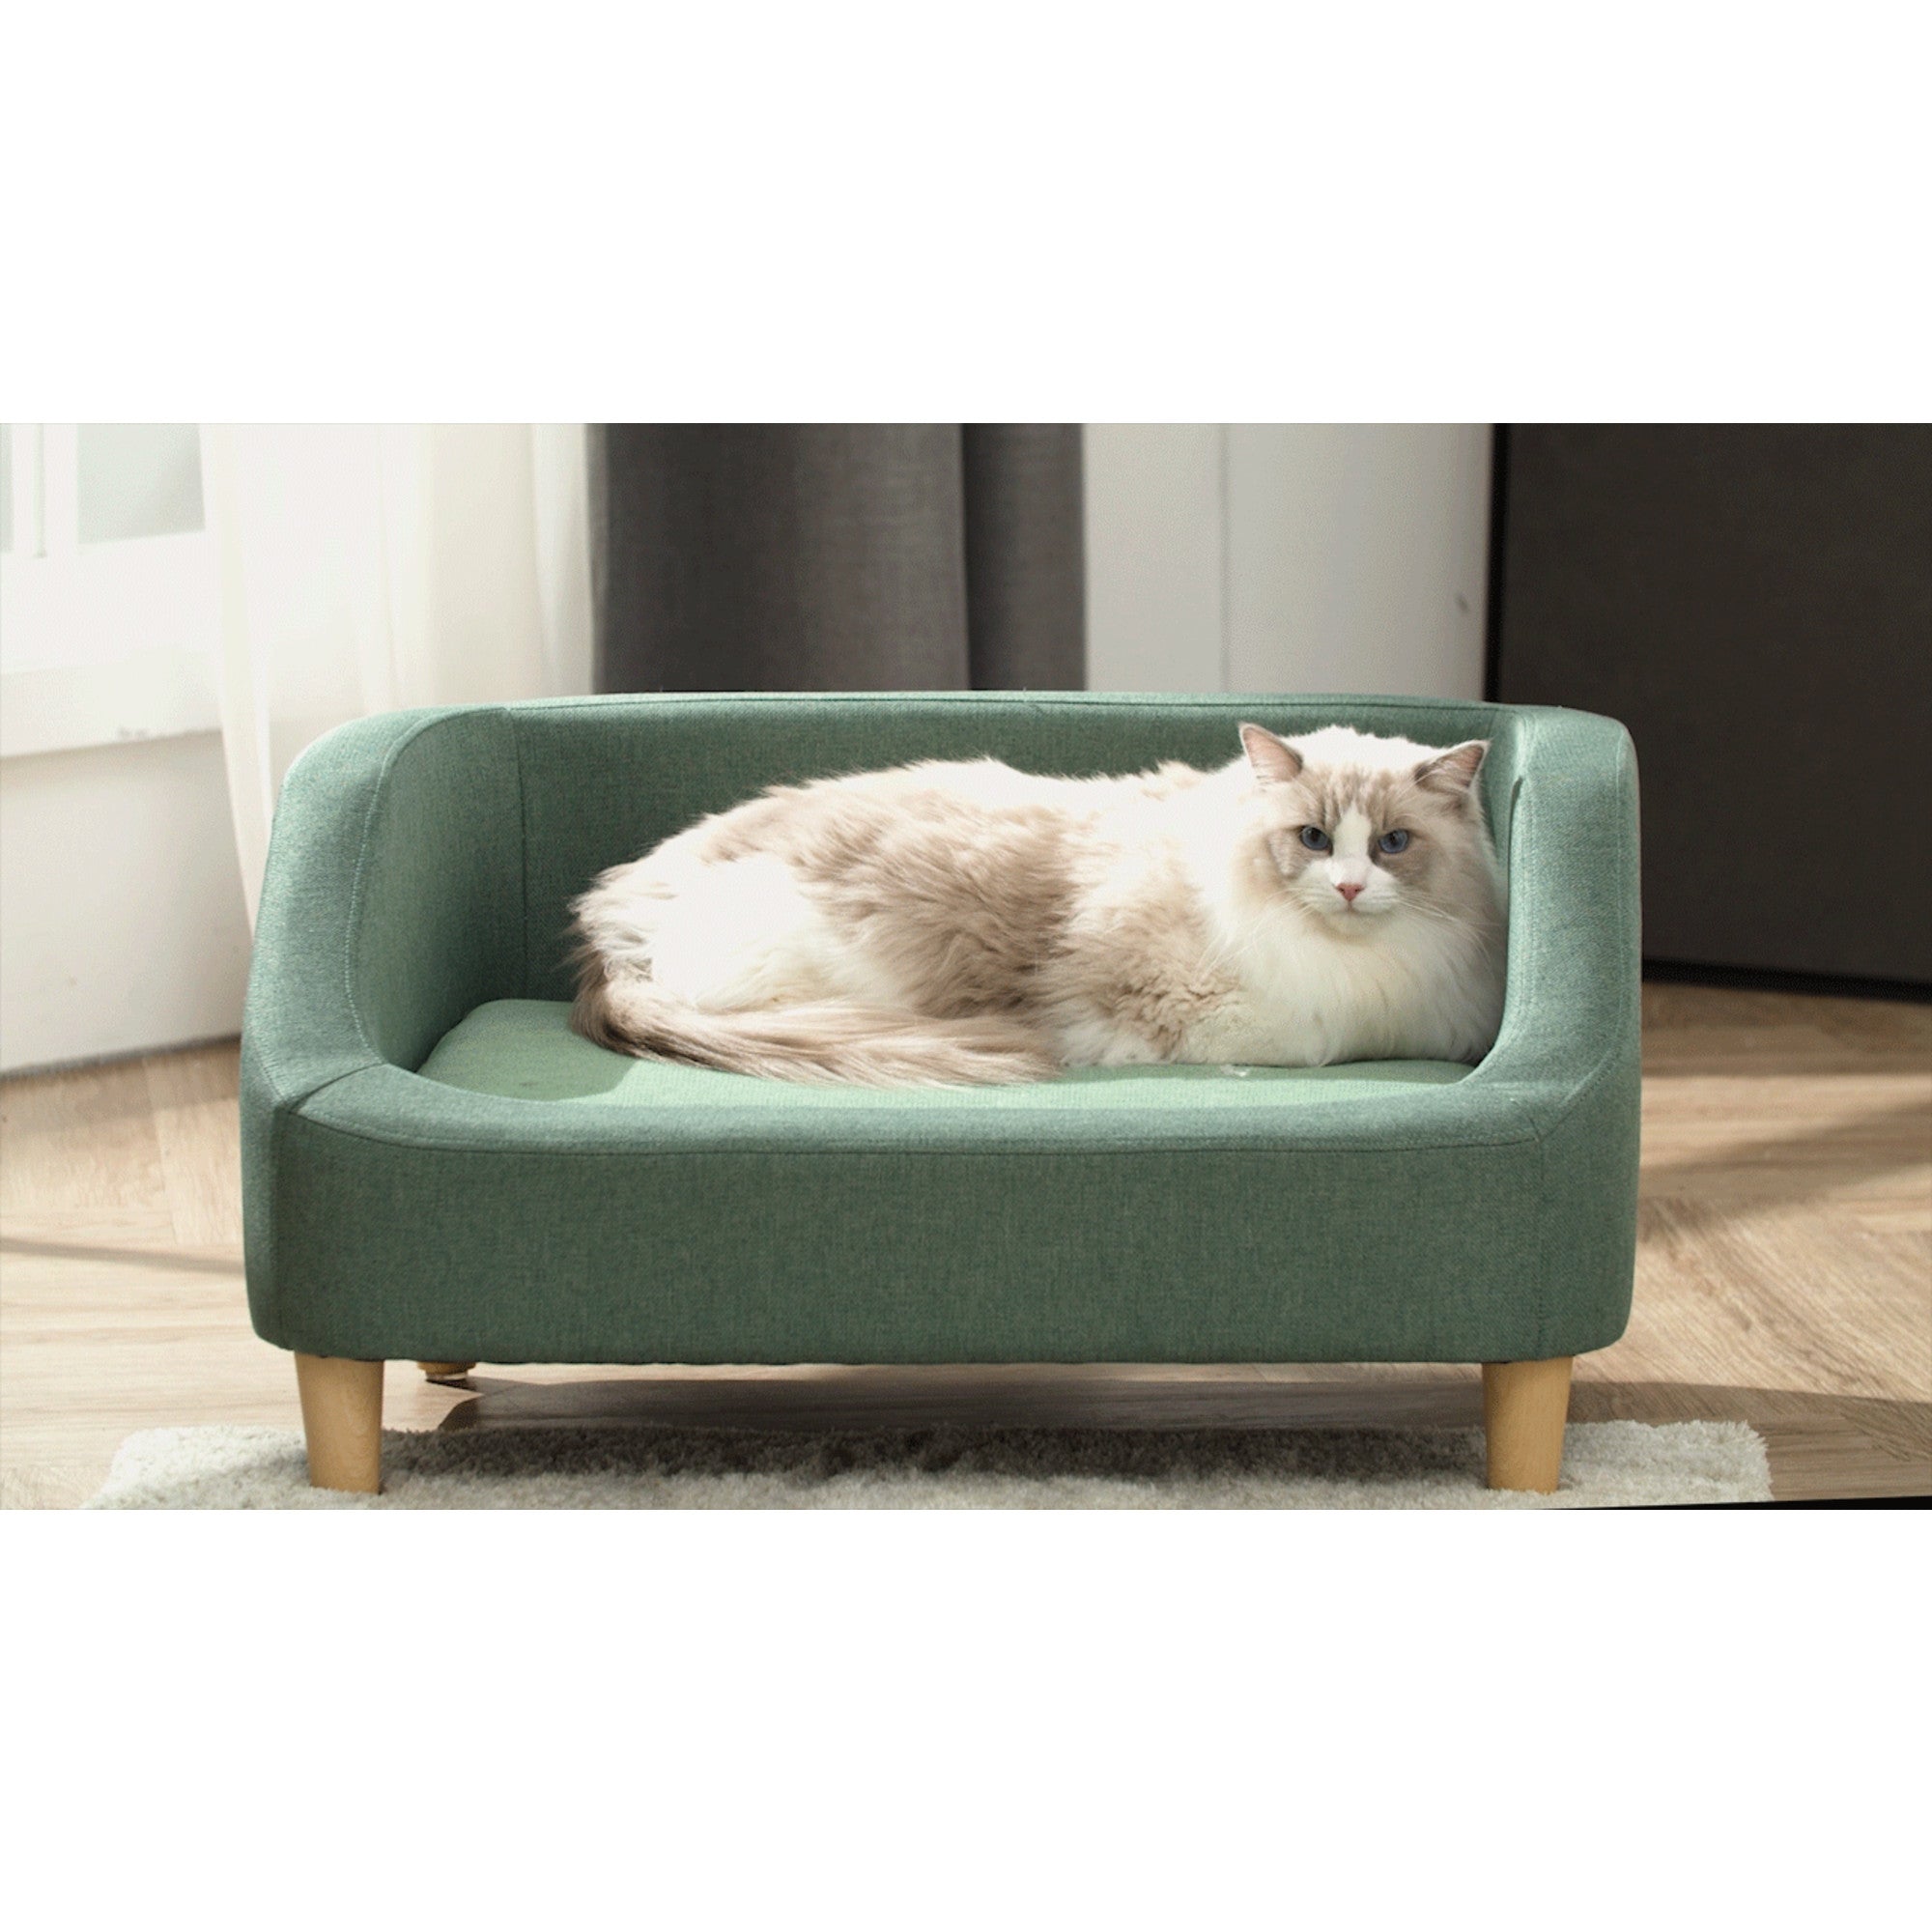 Teamson Pets Bennett Linen Sofa Dog Bed for Small and Medium Dogs, Sea Green